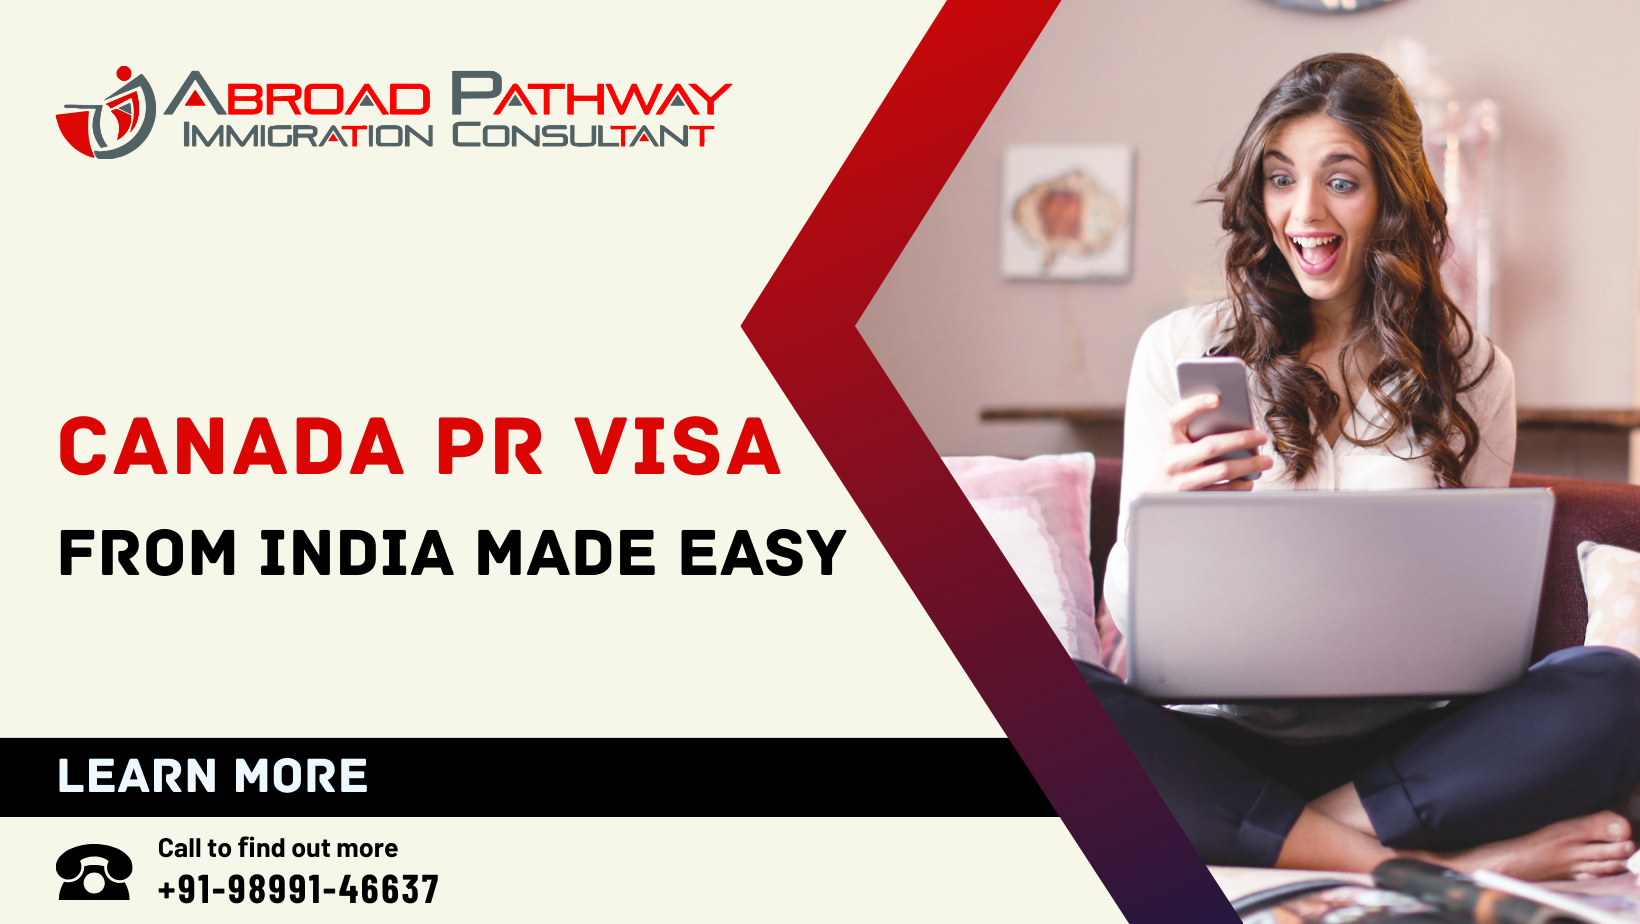 Applying for Canada pr visa from India made easy